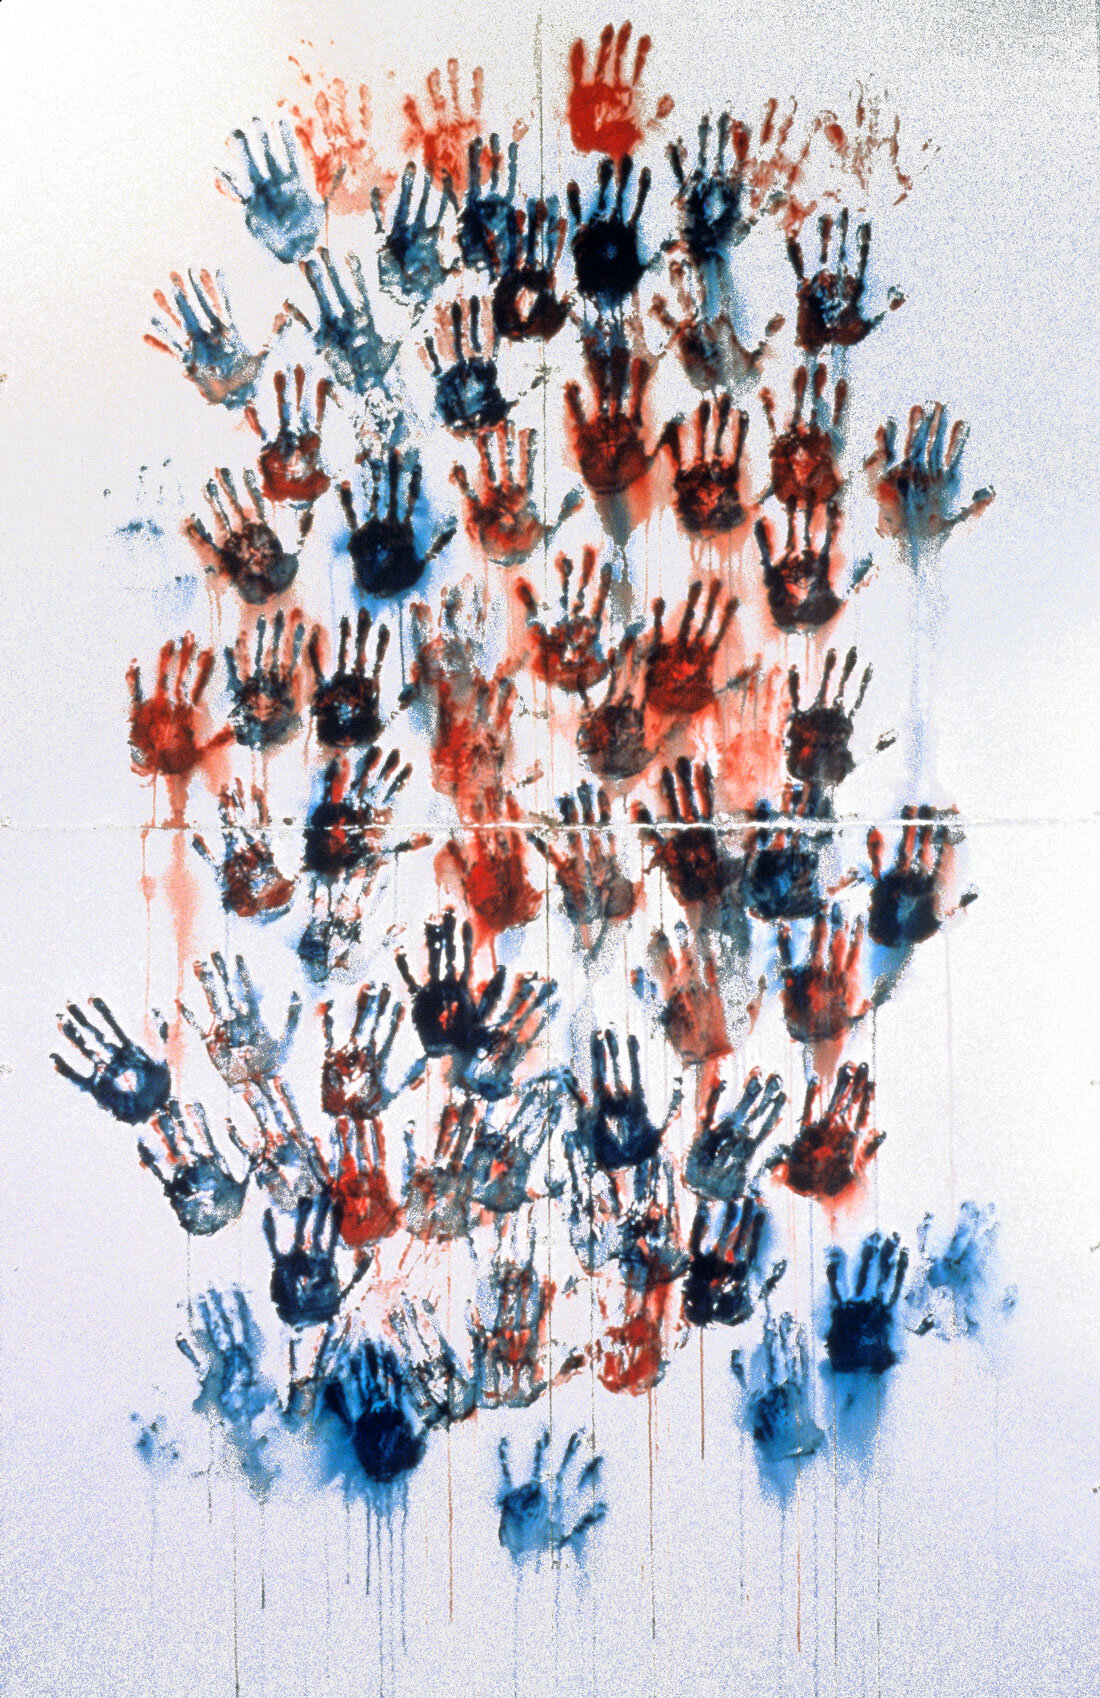   Open Cluster,  1994, 41 x 26 inches 